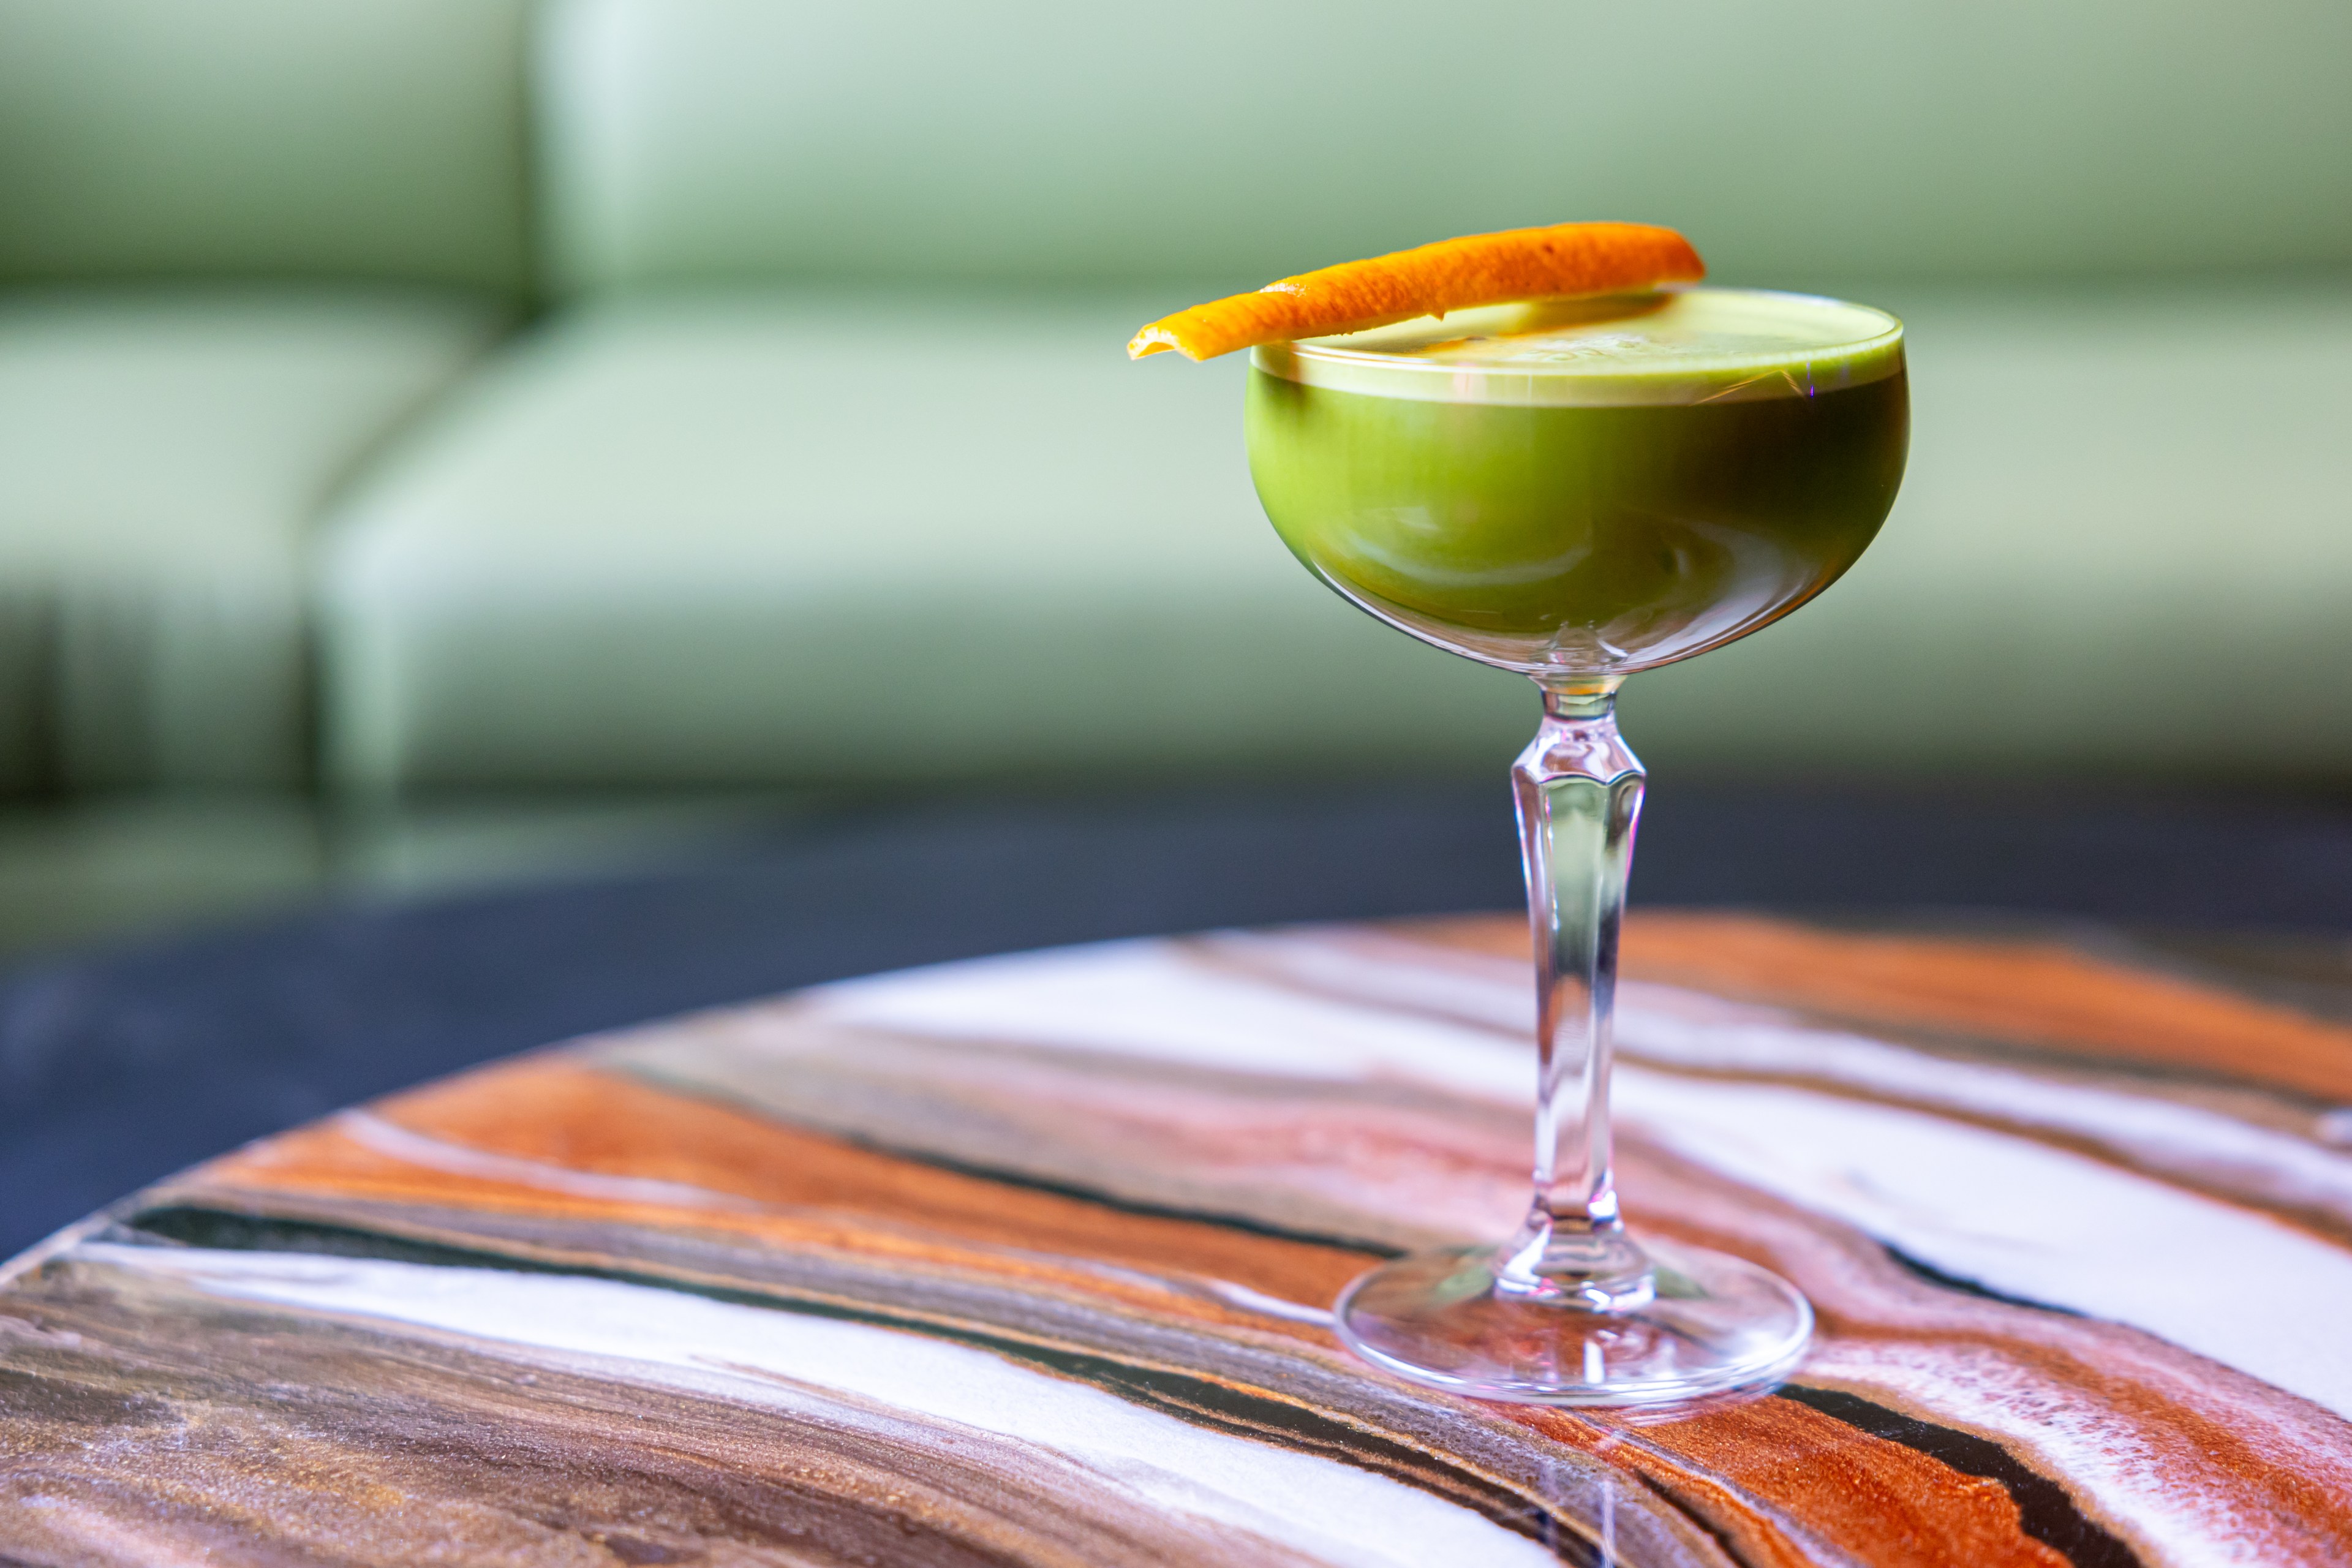 A green cocktail garnished with an orange peel in a coupe sits on a multicolored table.